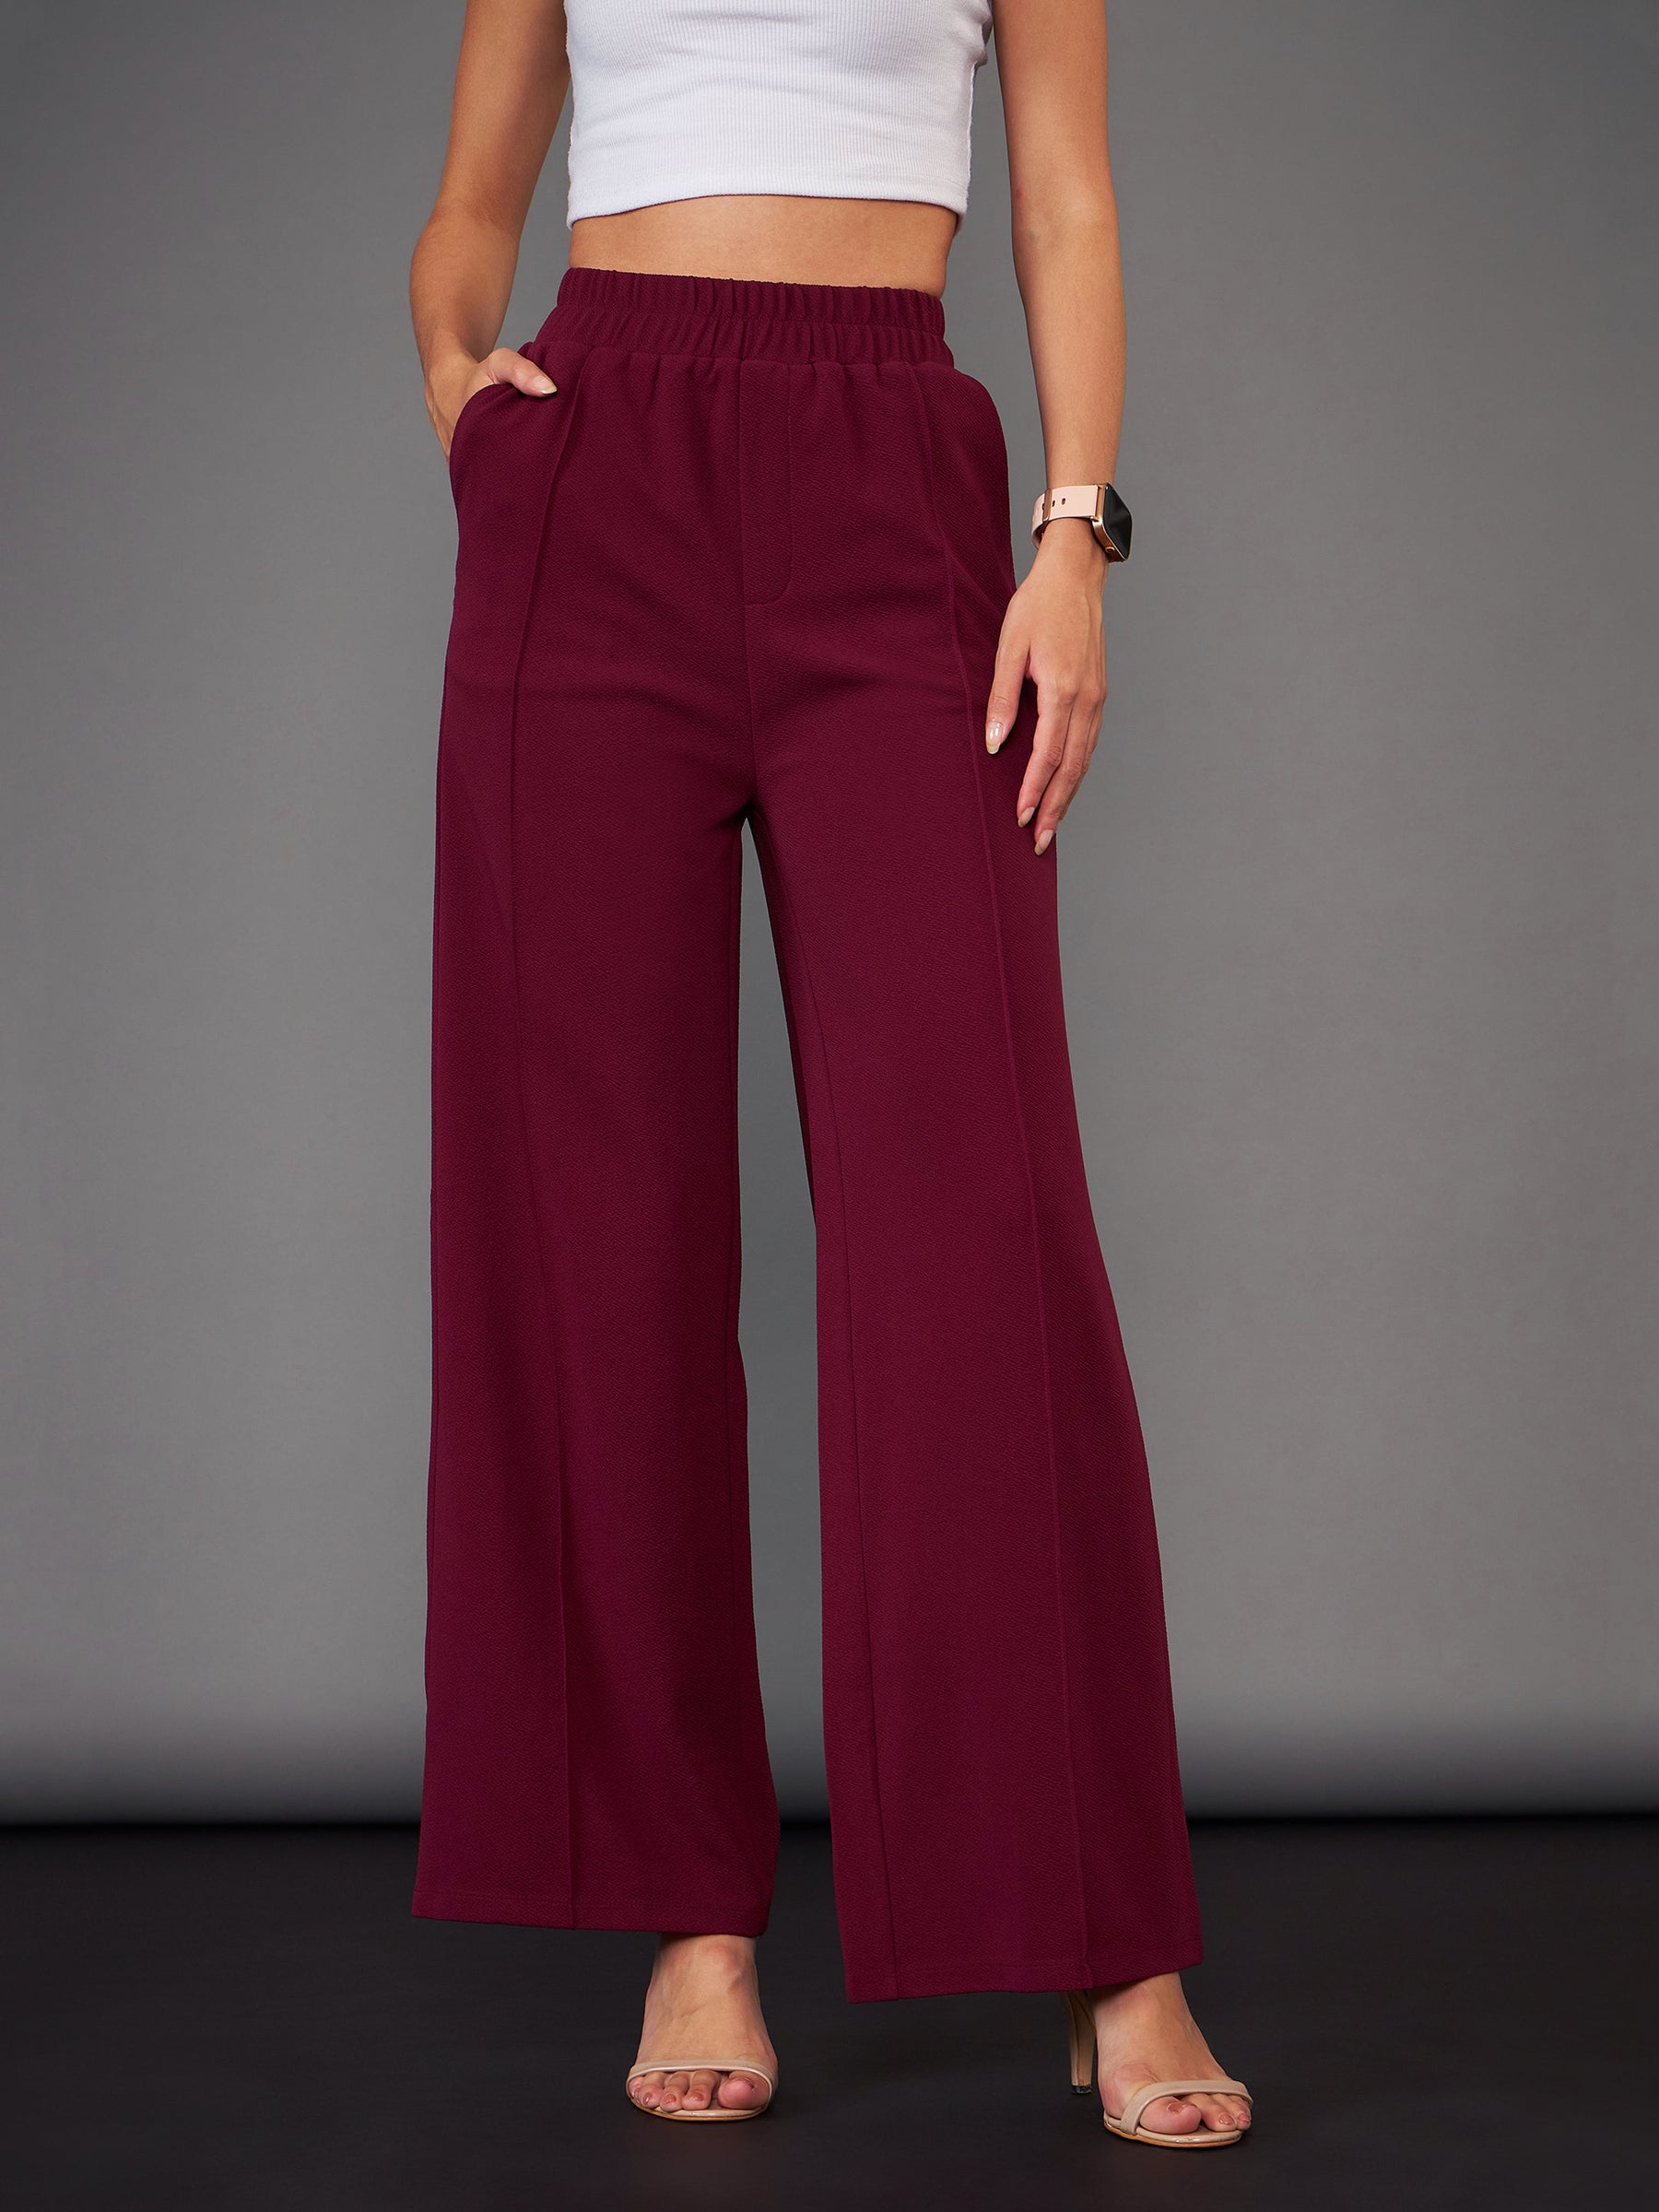 PALAZZO DESIGN Flared Women Blue, Multicolor Trousers - Buy PALAZZO DESIGN  Flared Women Blue, Multicolor Trousers Online at Best Prices in India |  Flipkart.com